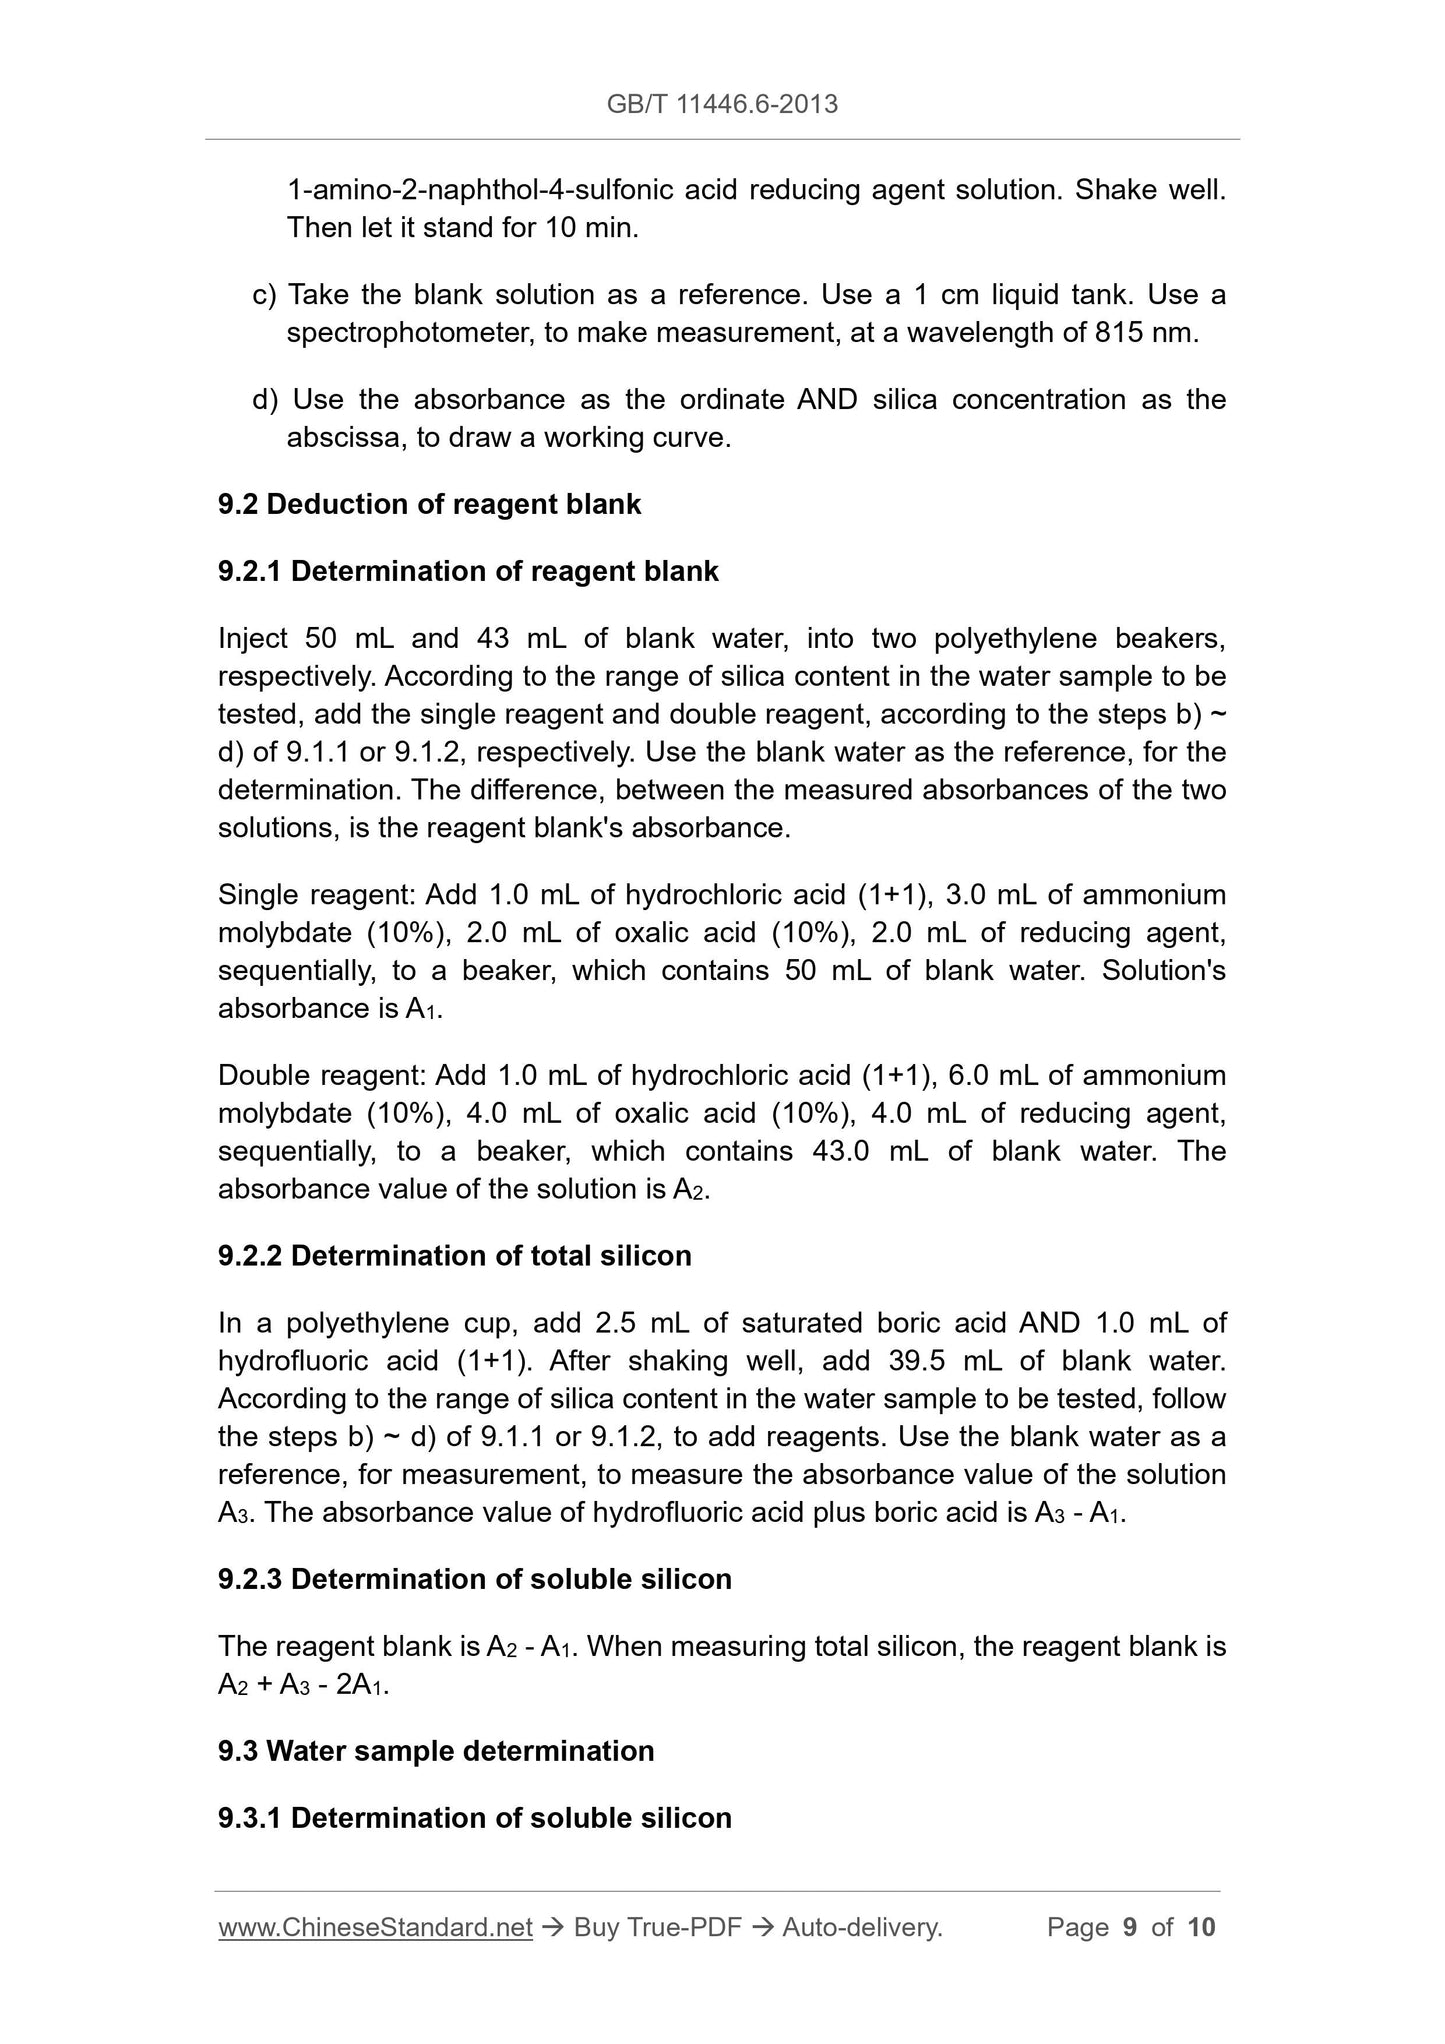 GB/T 11446.6-2013 Page 5